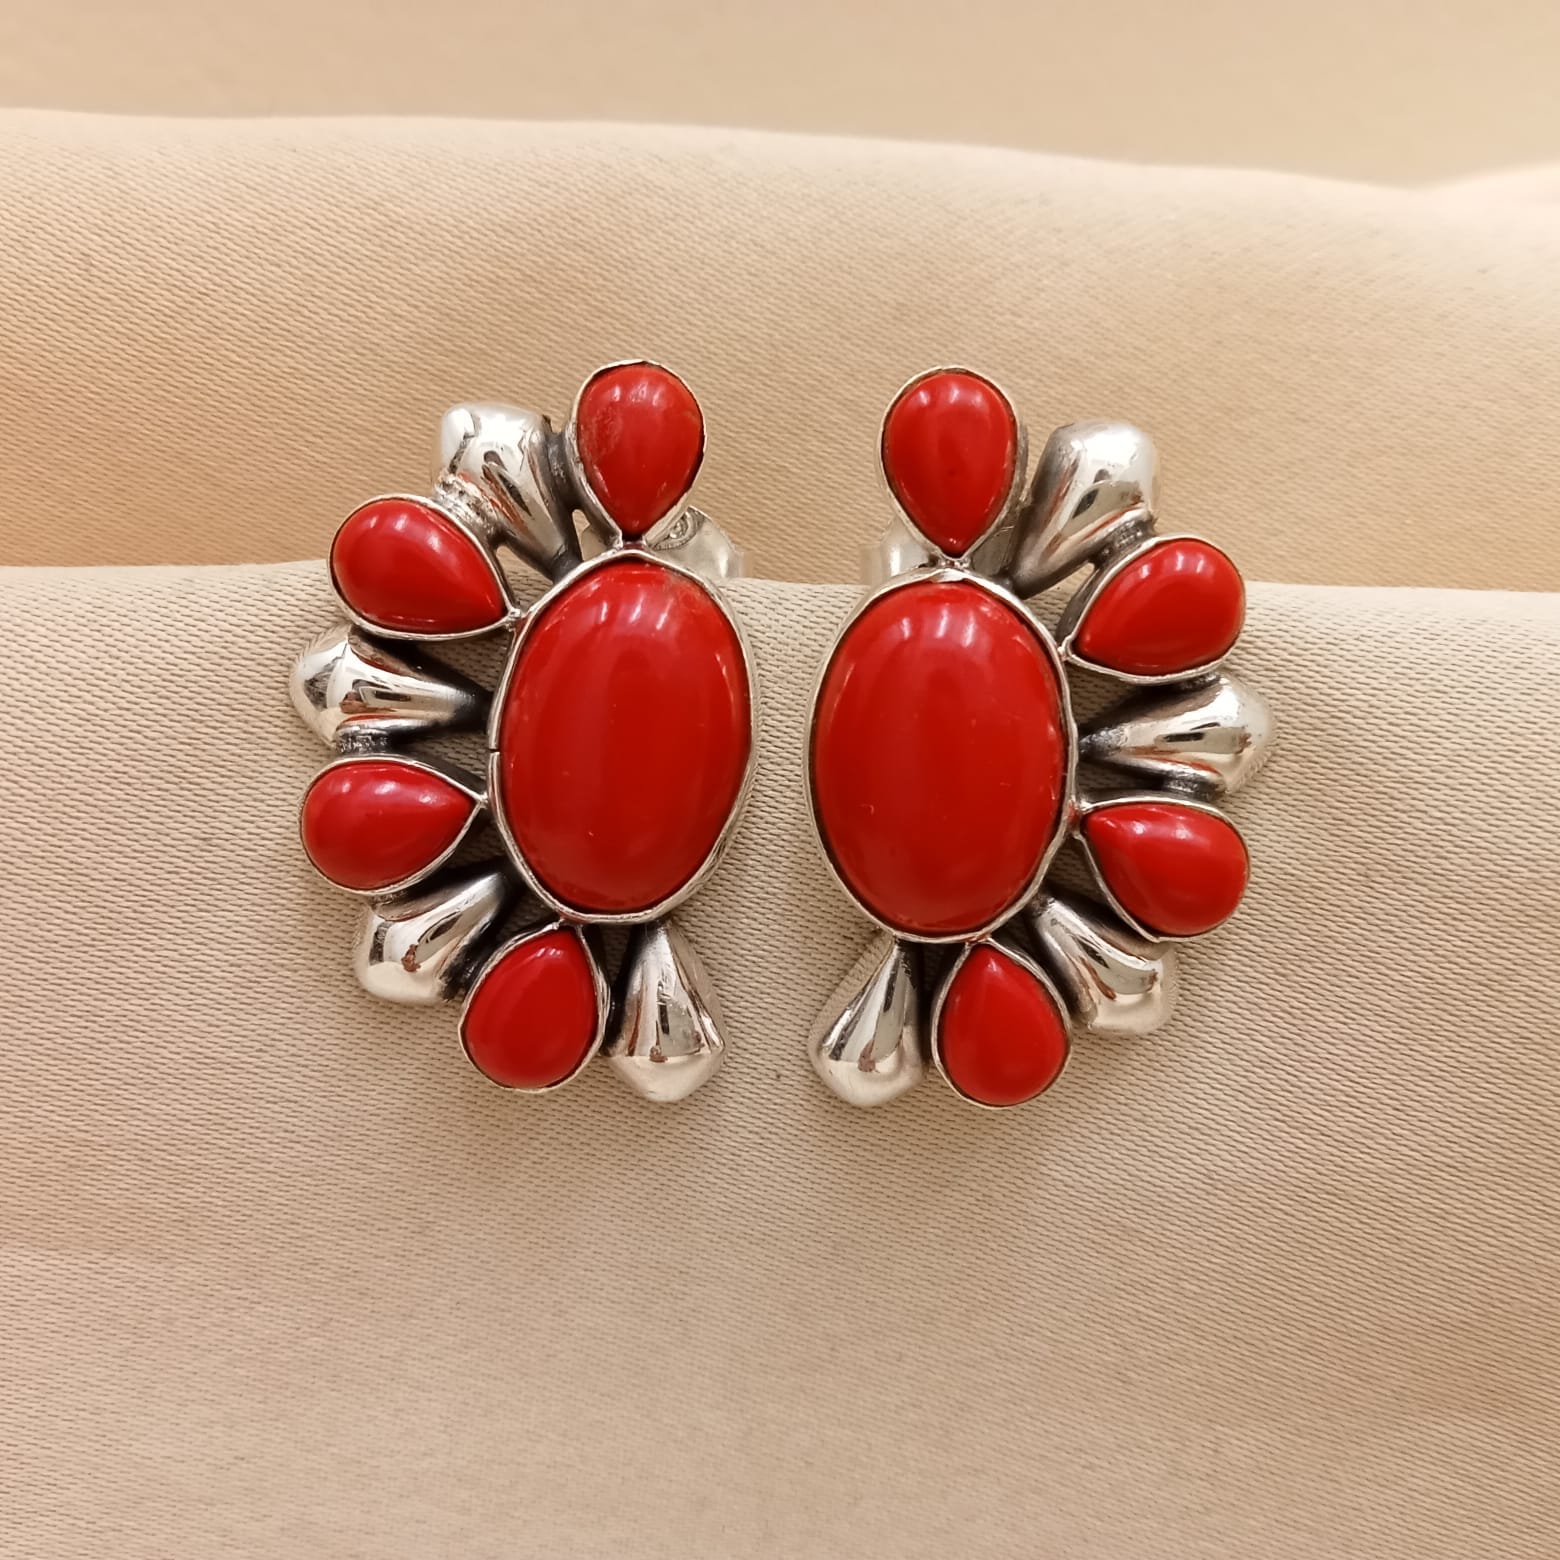 Red Coral jewellery set Sterling silver 925 Armenian jewellery Handmade  natural red gem ring and earrings Best gift for her • BuyArmenian  Marketplace